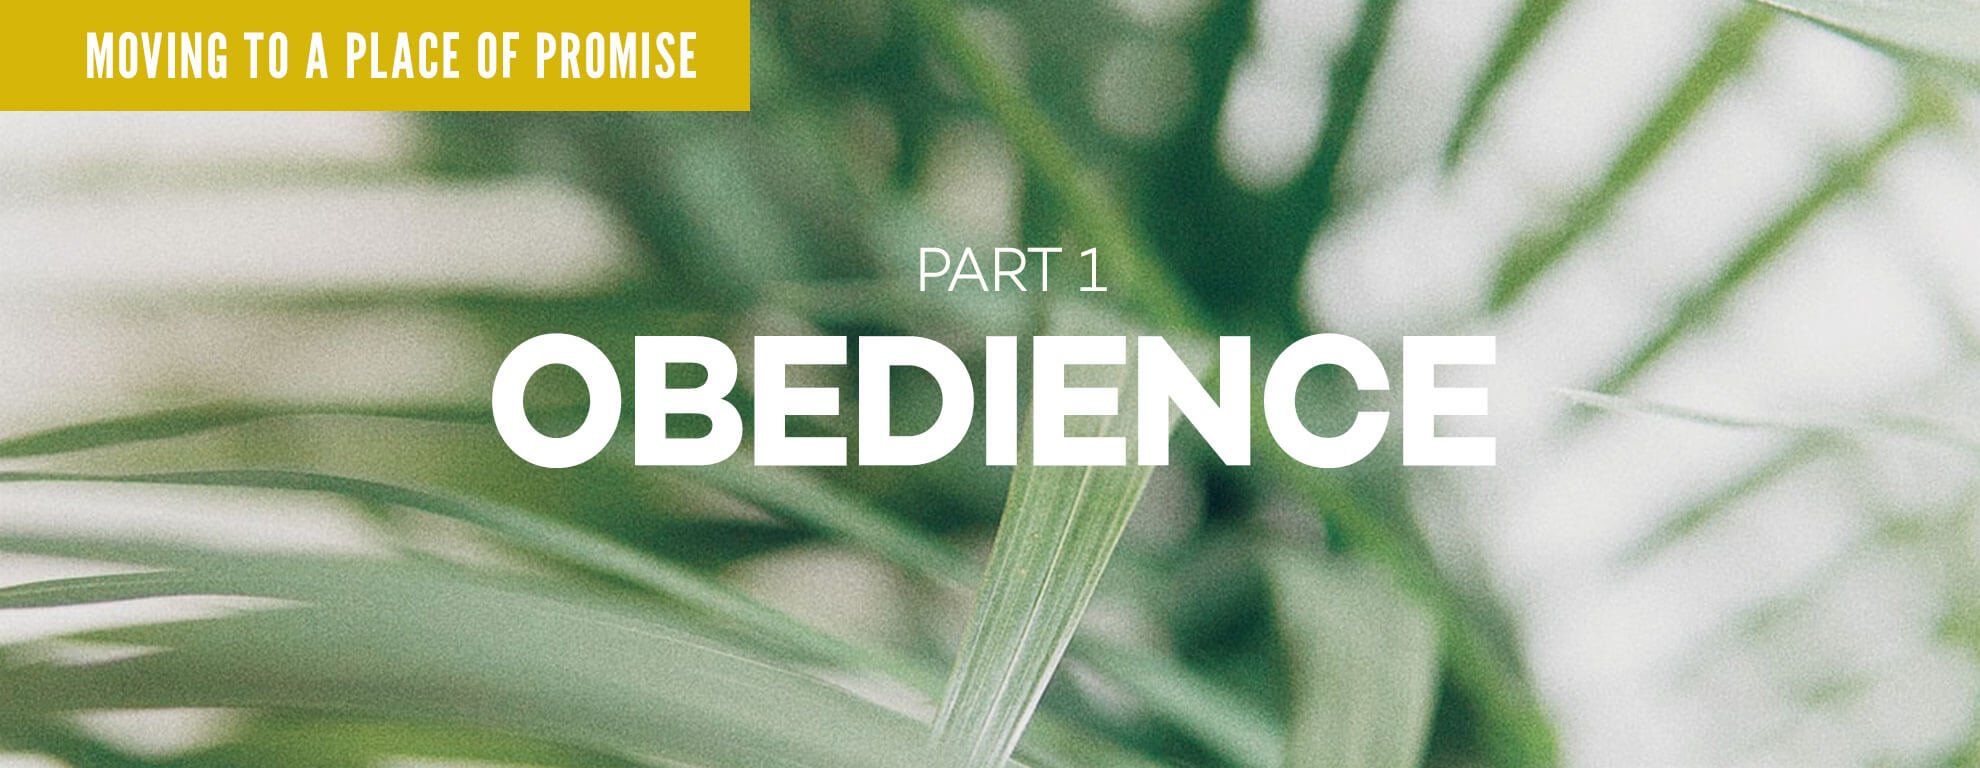 Part 1, Obedience